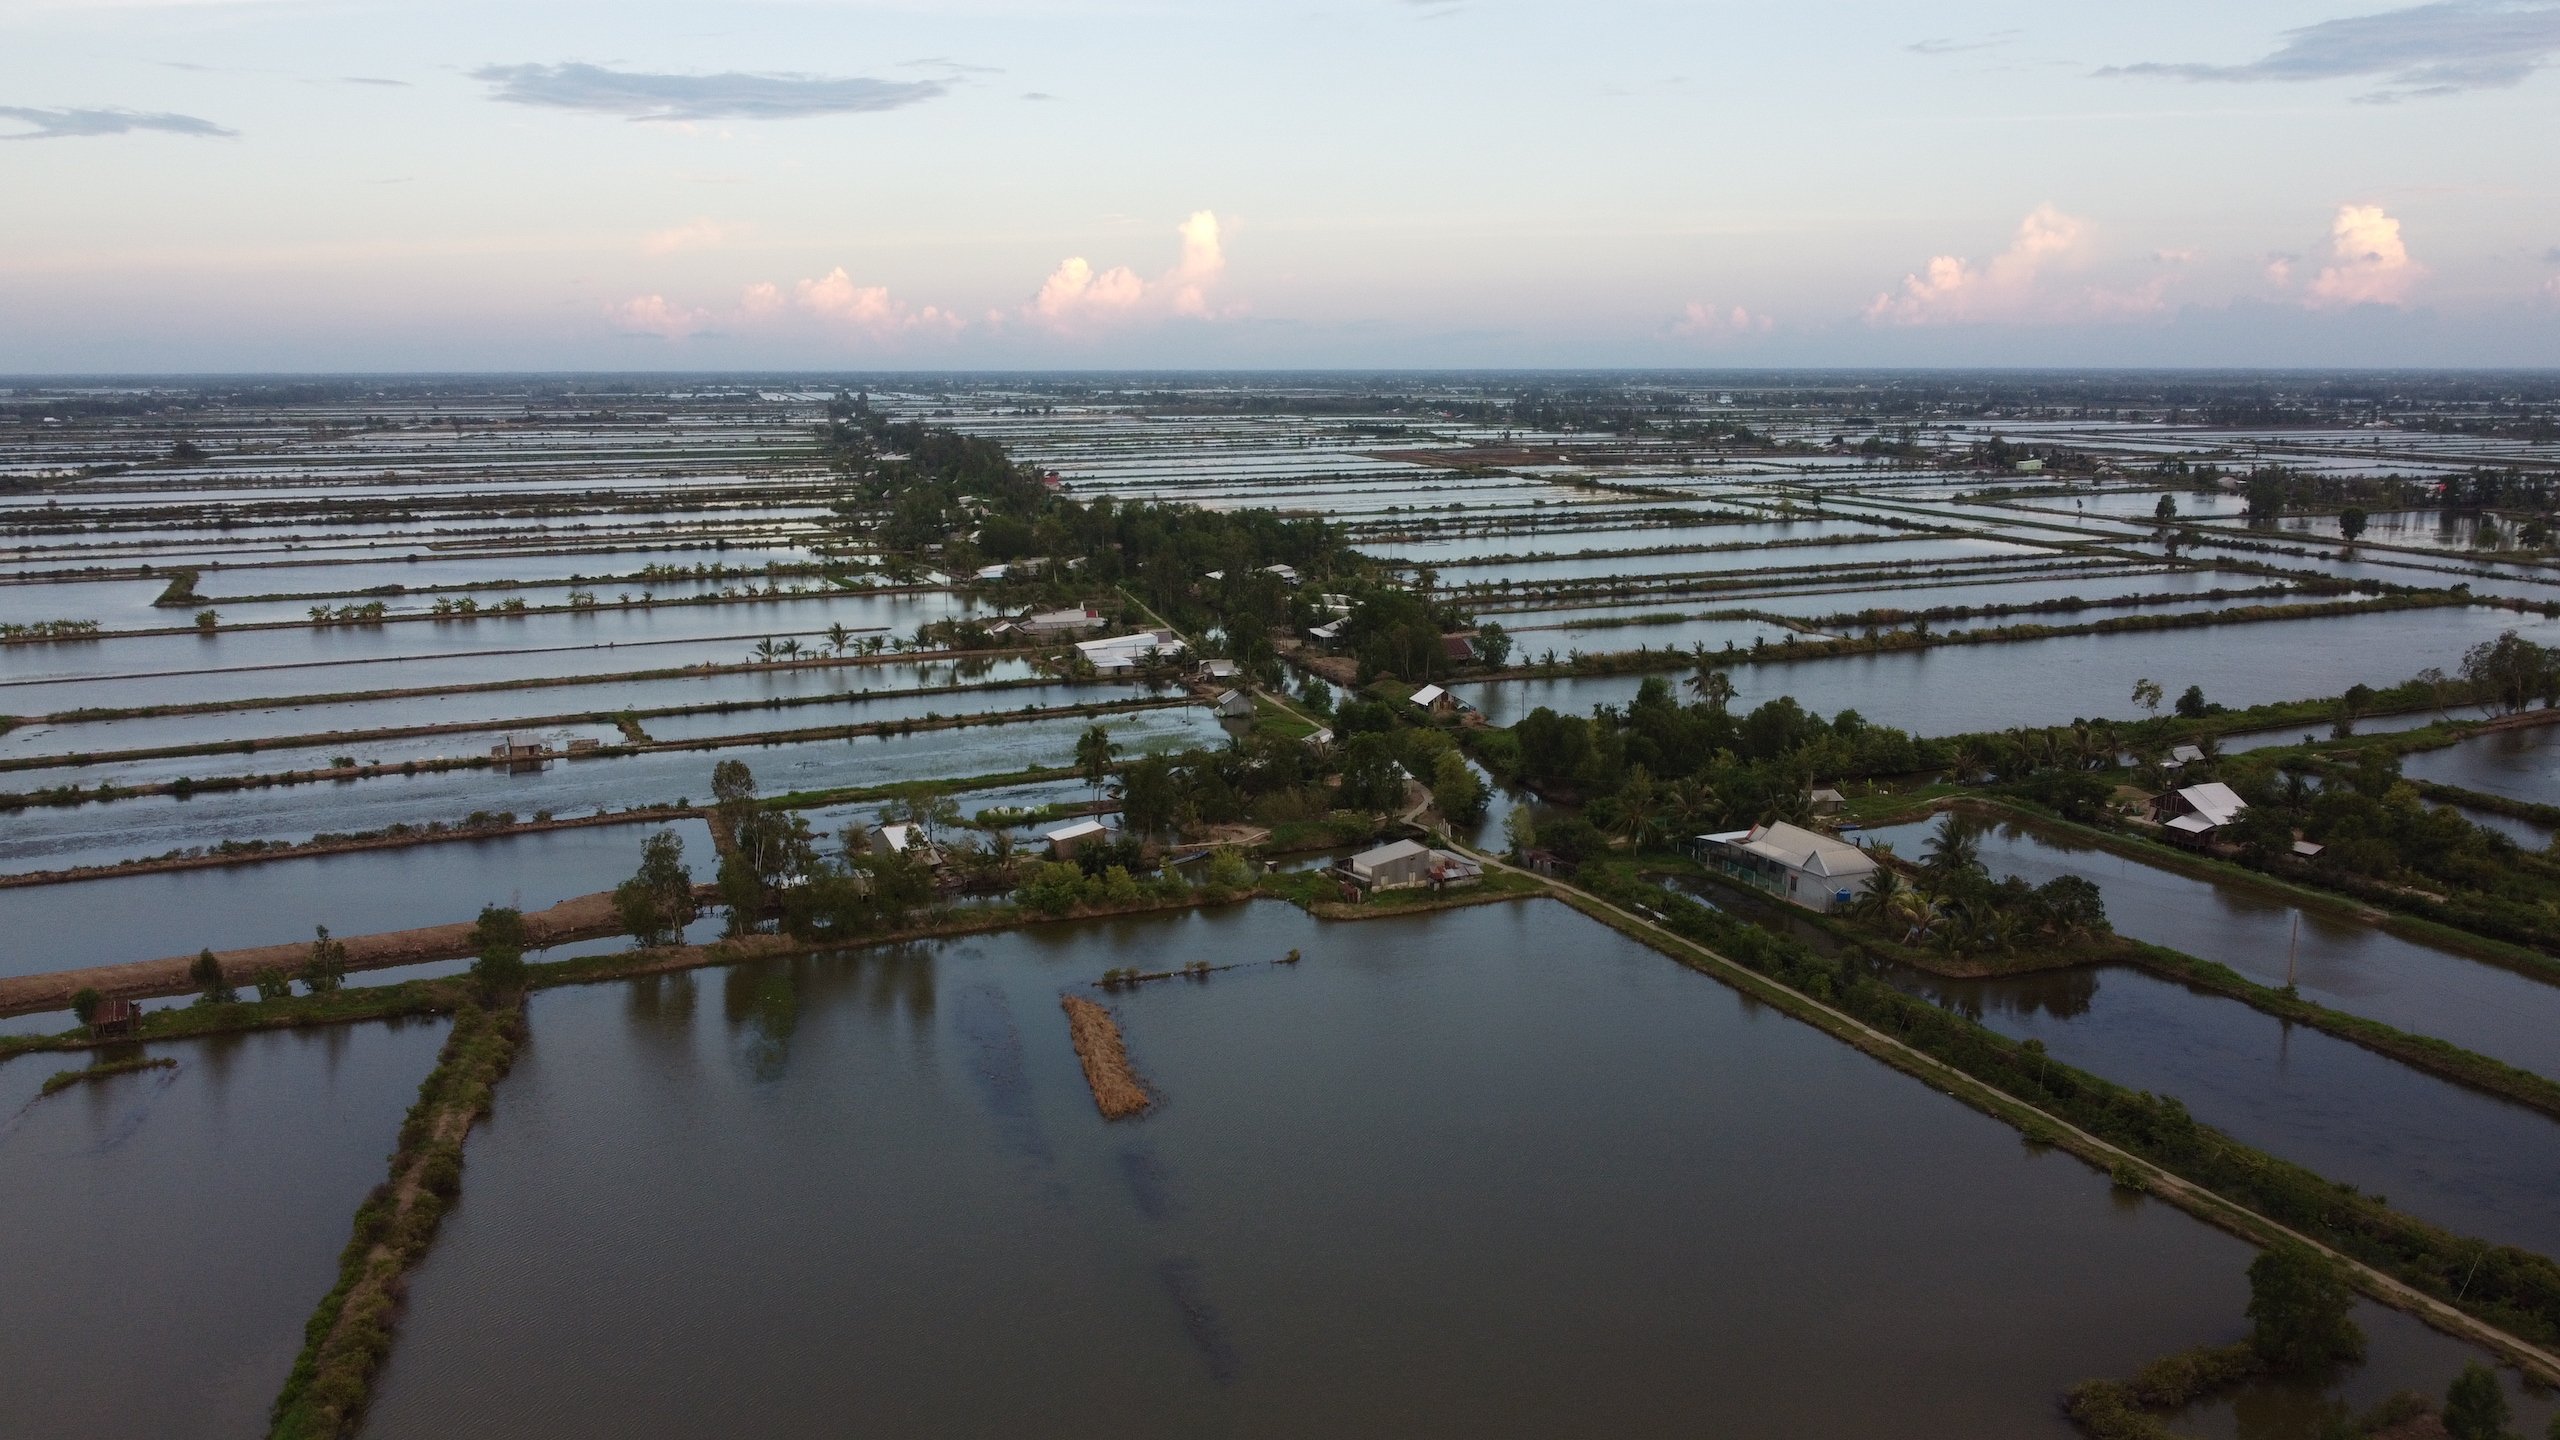 Flooded rice paddies in the Mekong Delta, Nhìn Tấn Thuận